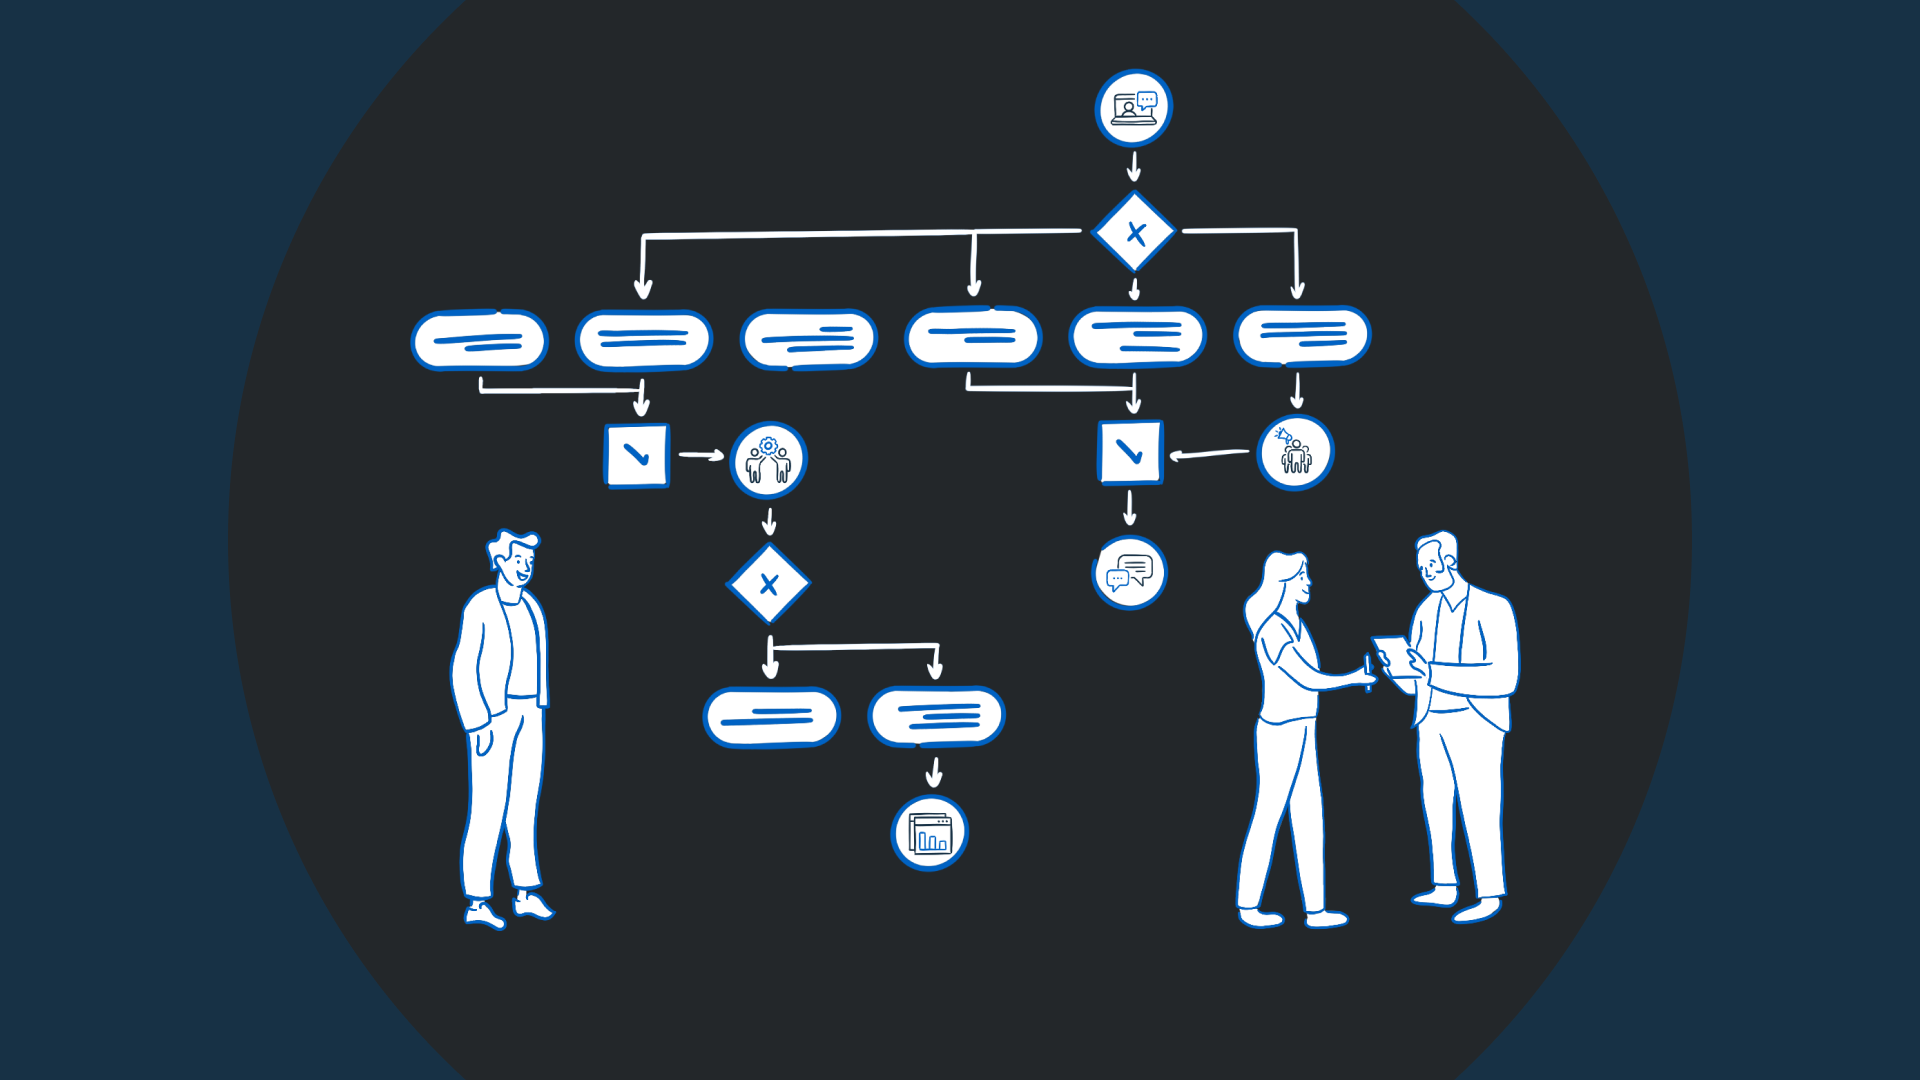 Illustration of a complex workflow and people collaborating to form a DesignOps plan